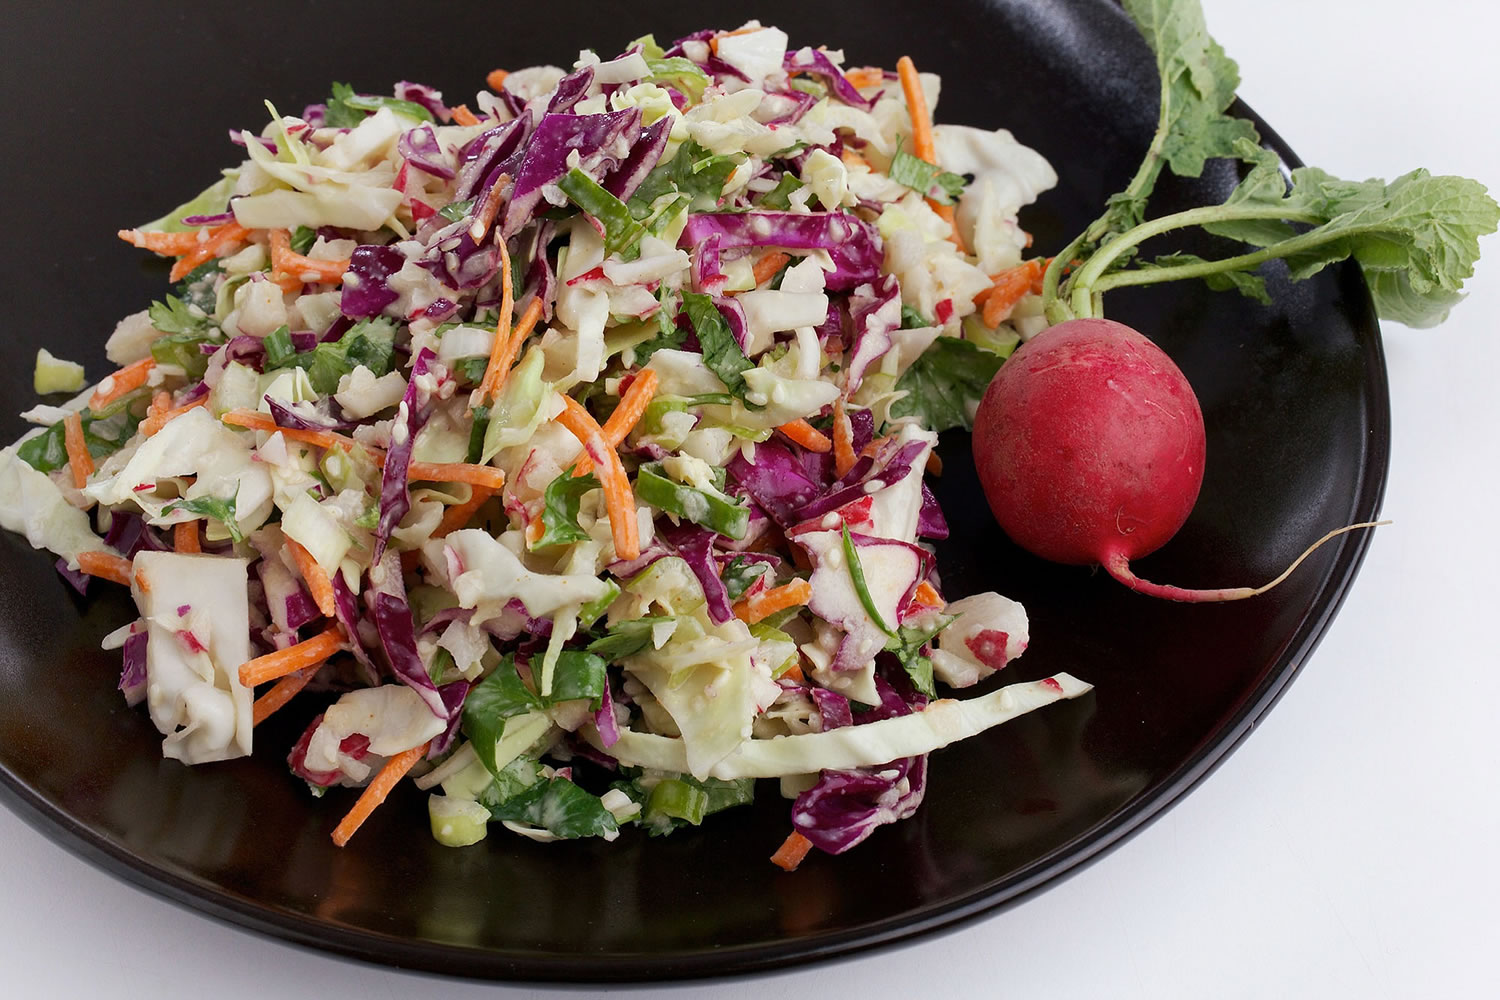 This mayonnaise-free coleslaw uses tahini, which is made from ground sesame seeds and adds protein to a salad side dish without the bad fats.